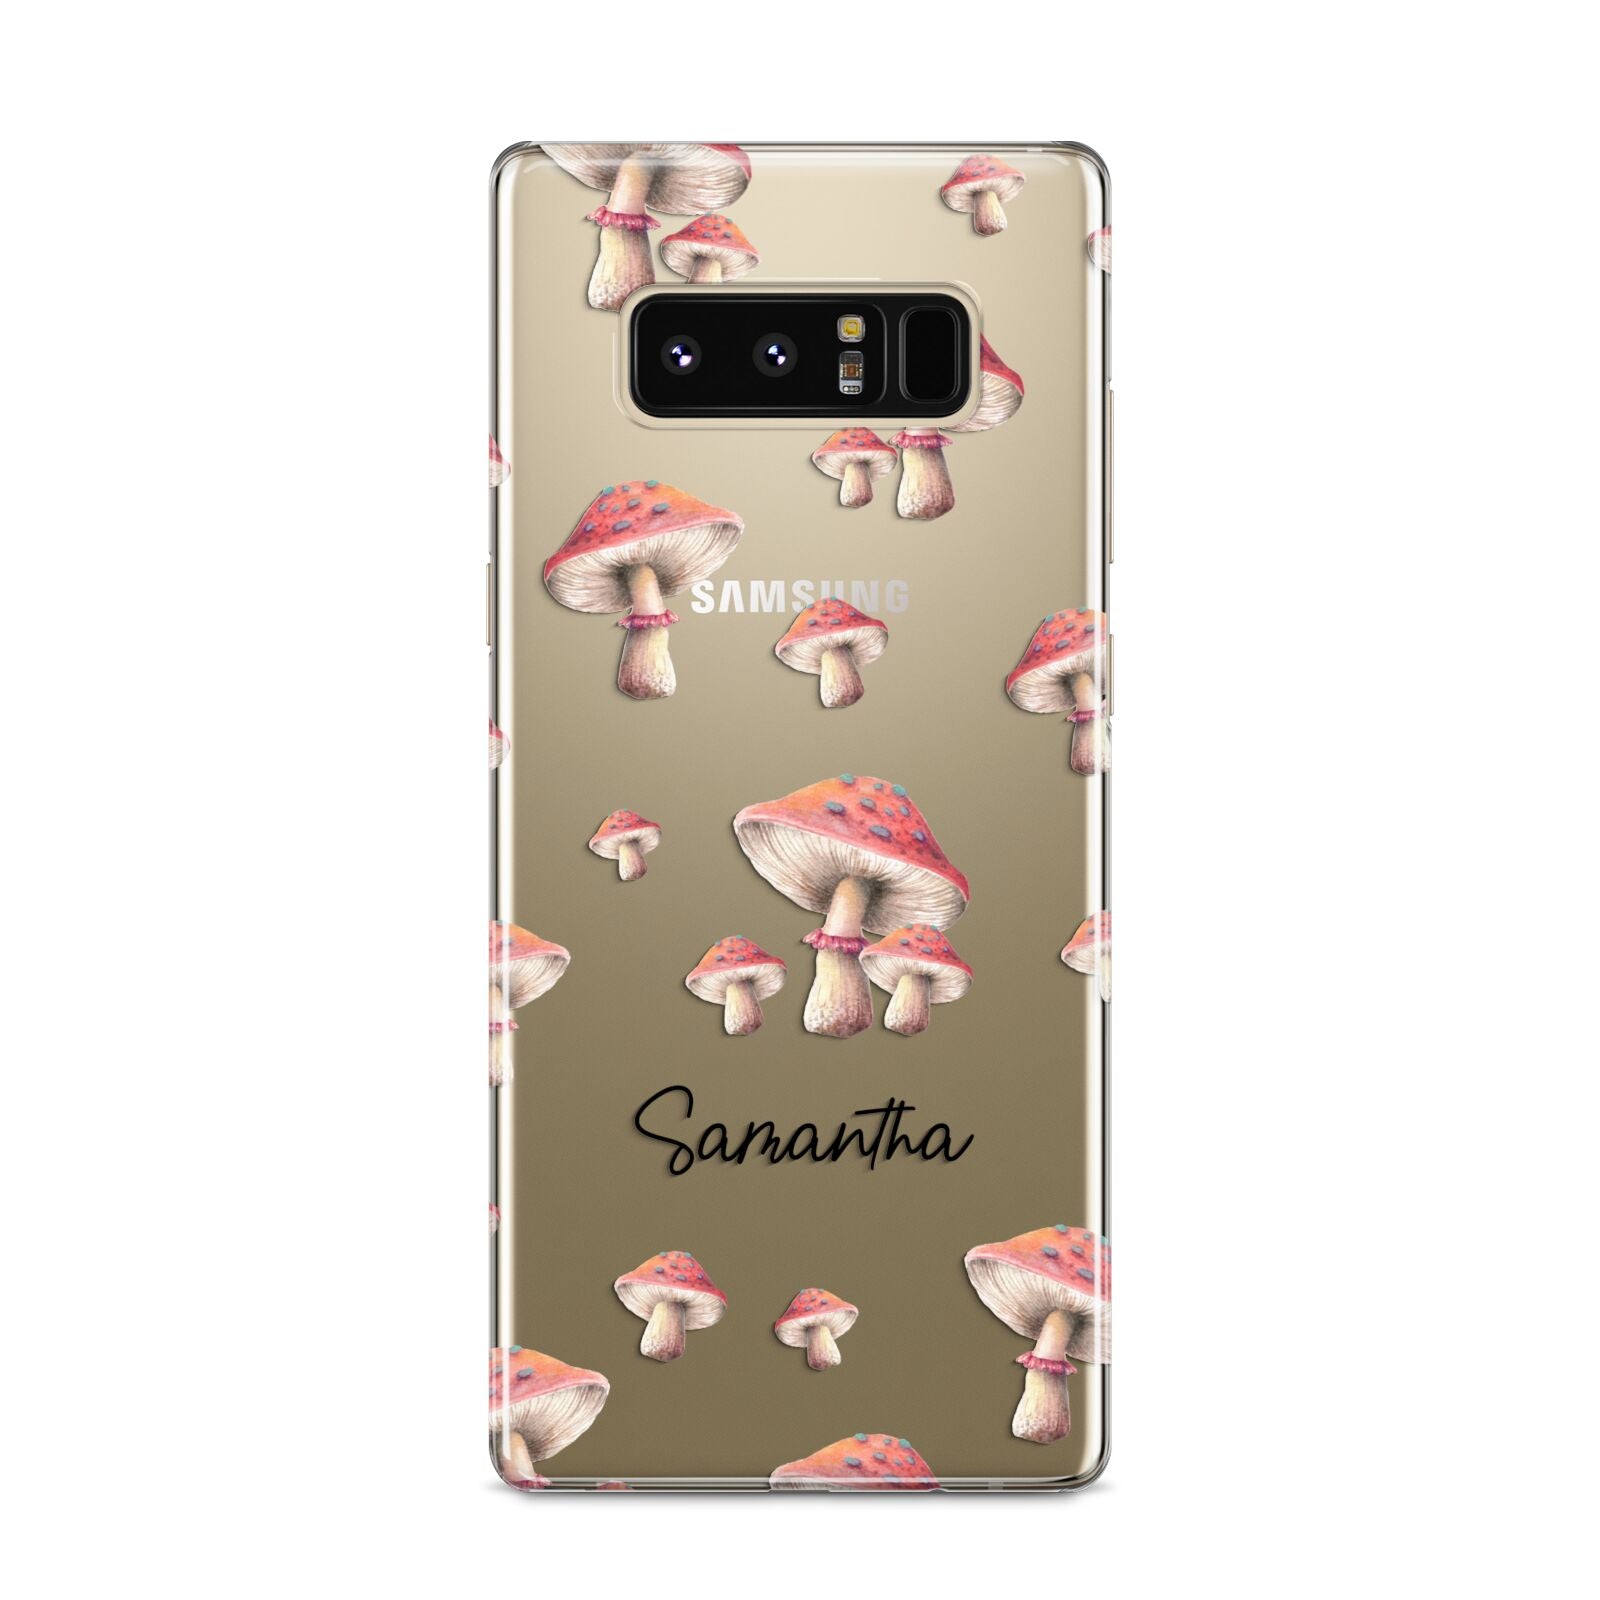 Mushroom Illustrations with Name Samsung Galaxy S8 Case